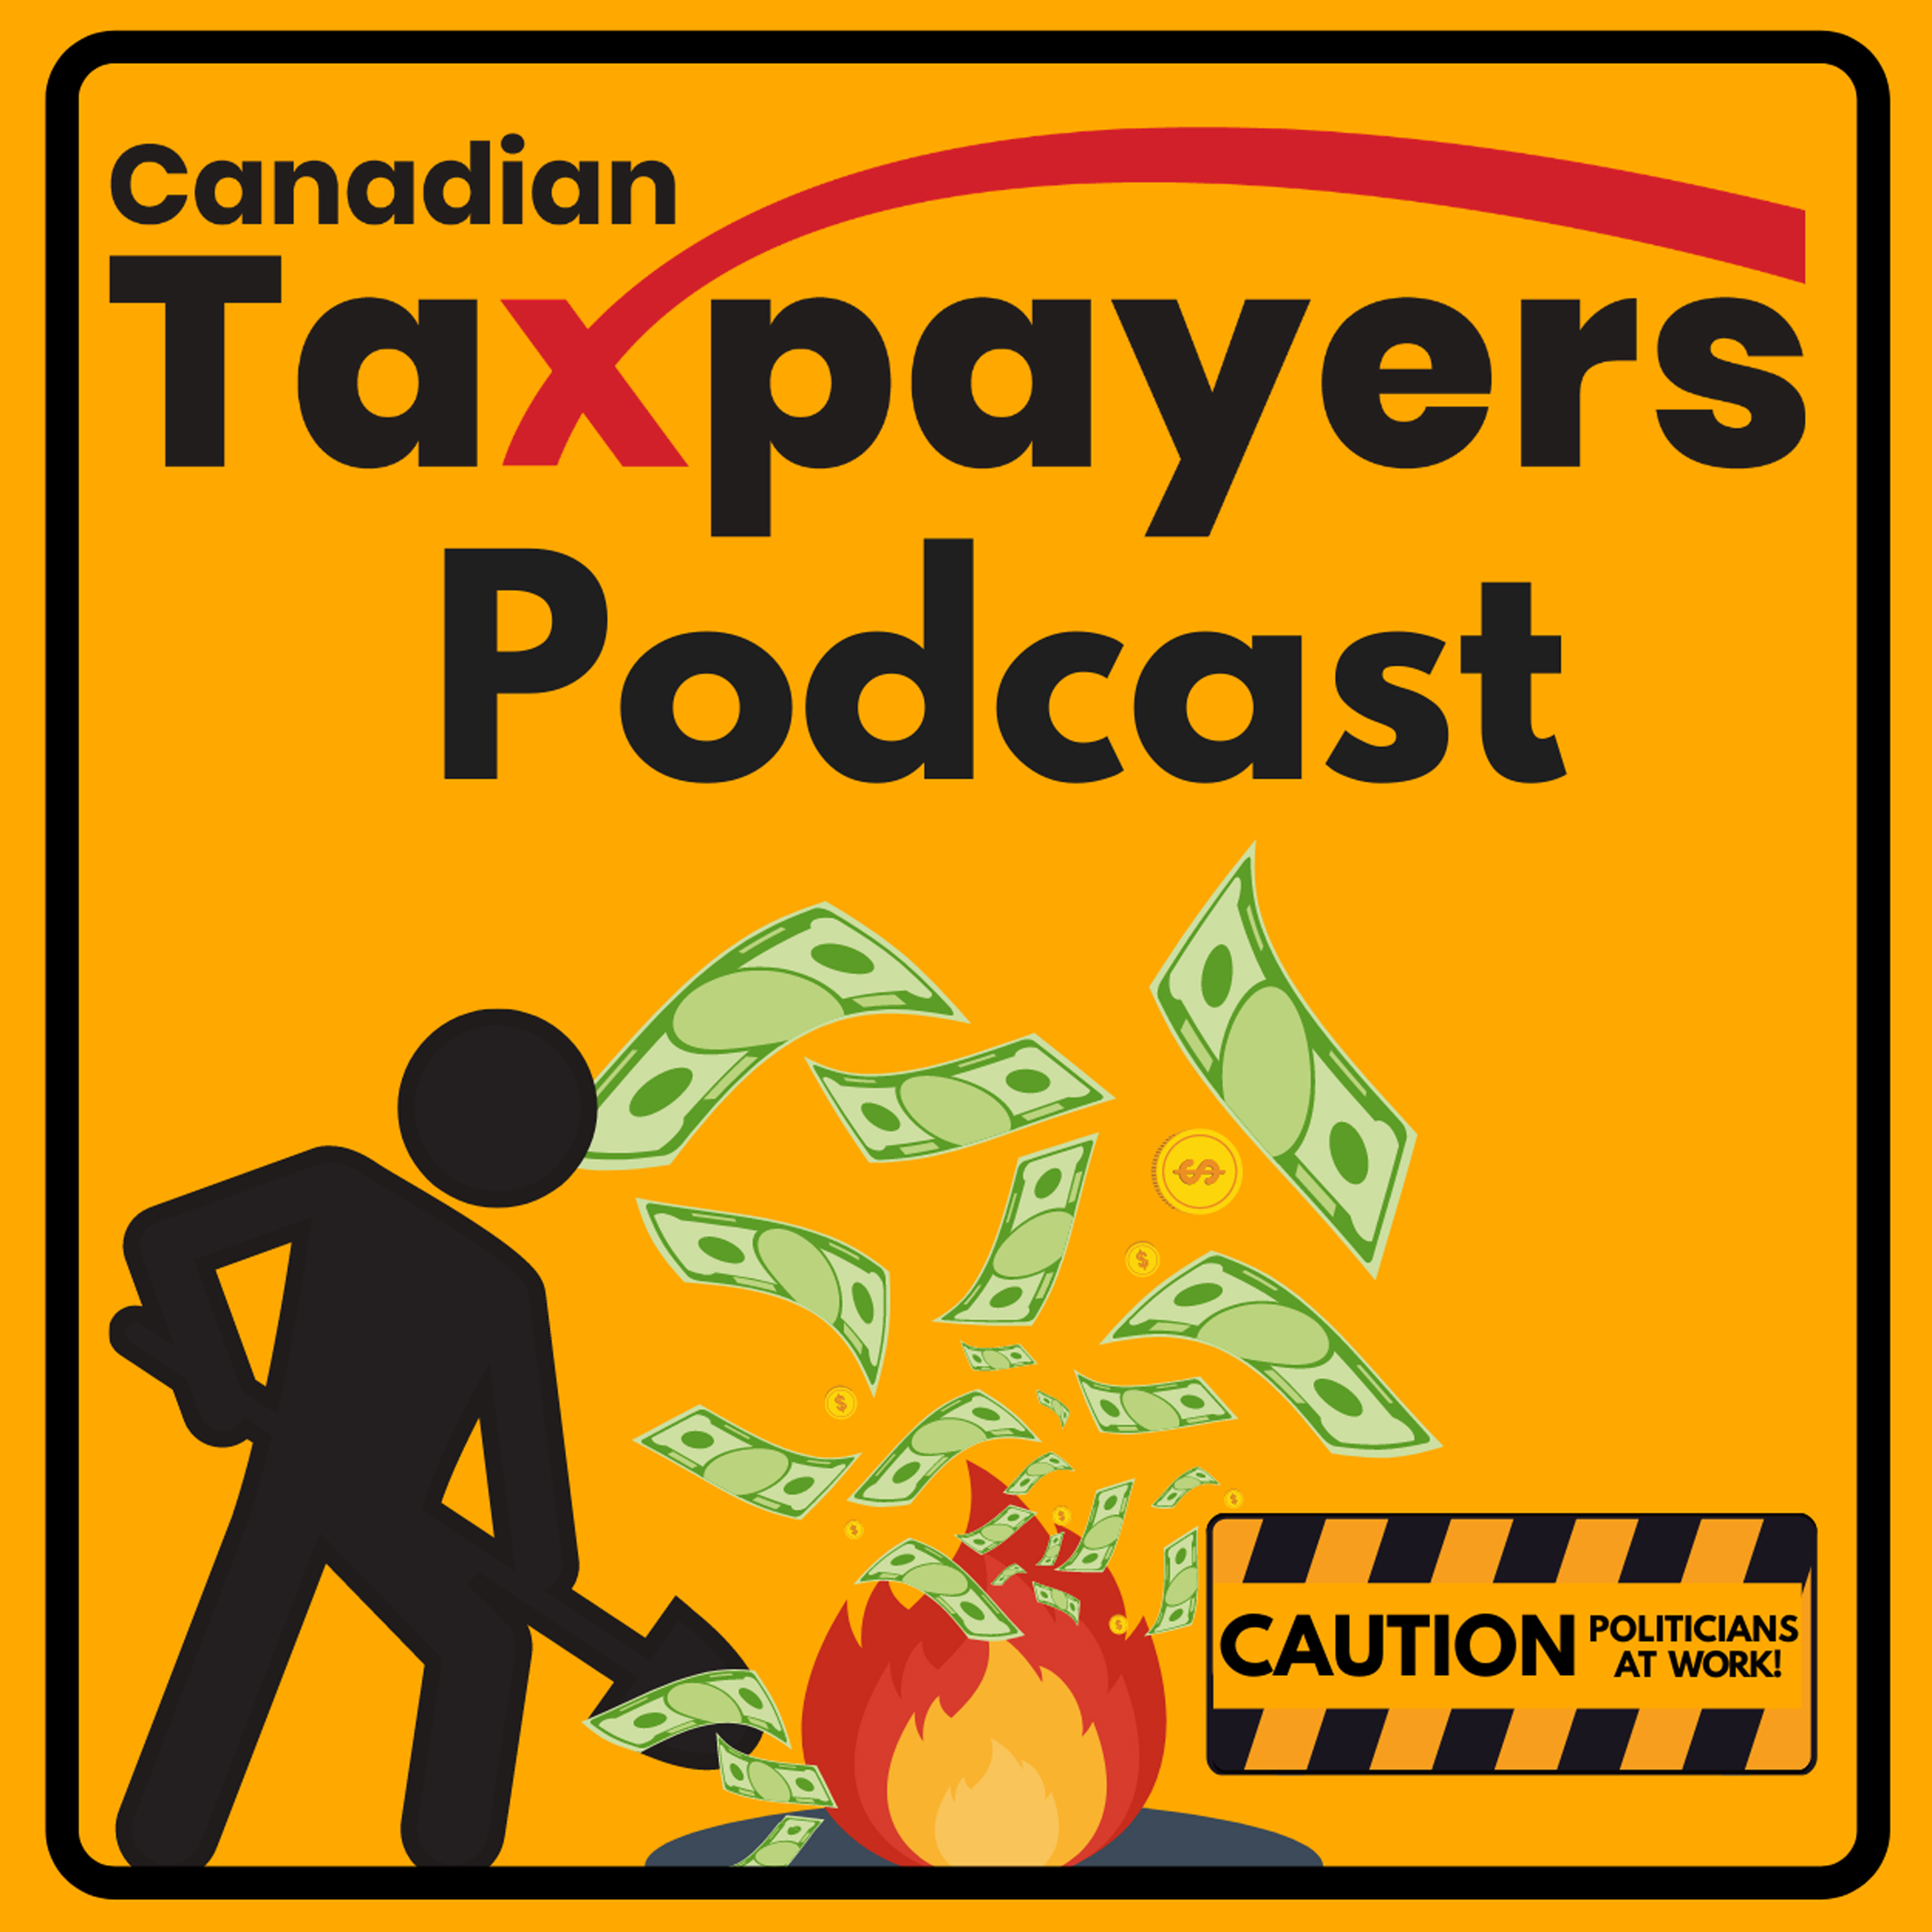 #33 The Mystery of Money-Losing Timmies, Access to Information Shutdown, and Rideau Hall Renovation Costs Skyrocket 